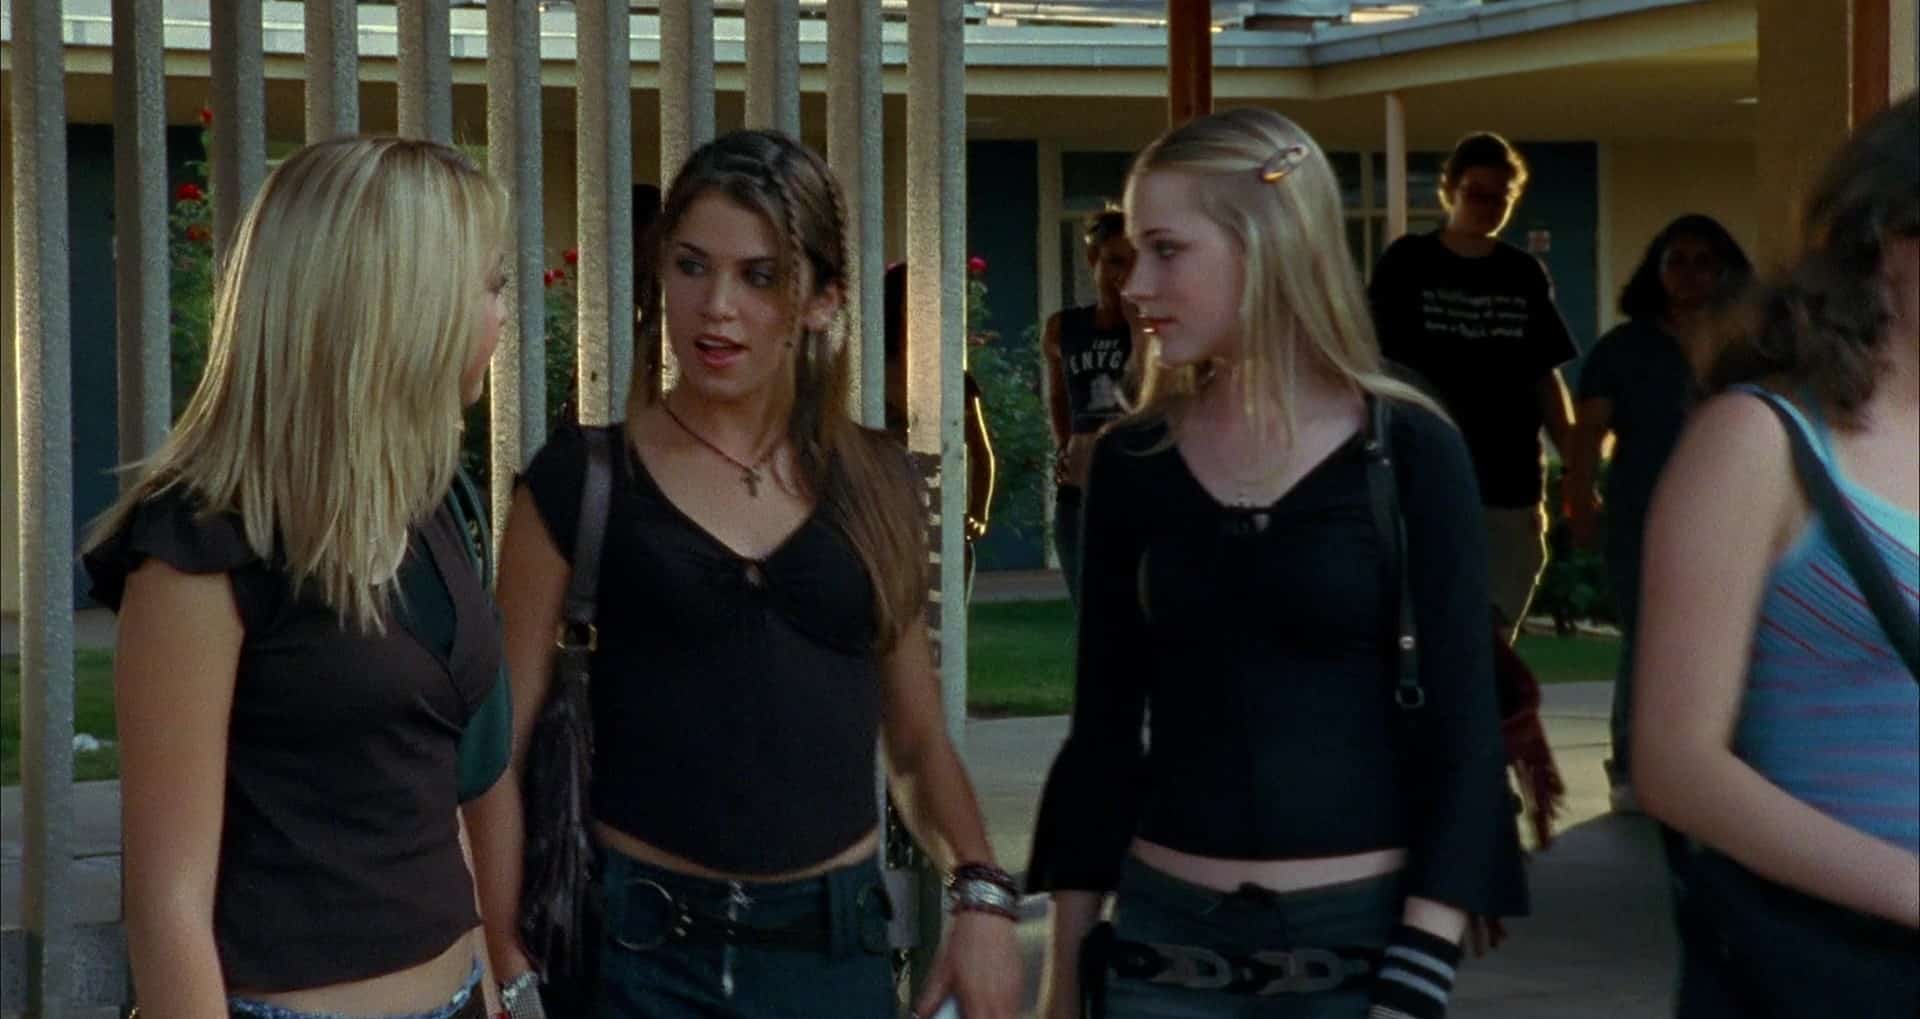 Girls chat outside a high school in this image from Fox Searchlight Pictures.